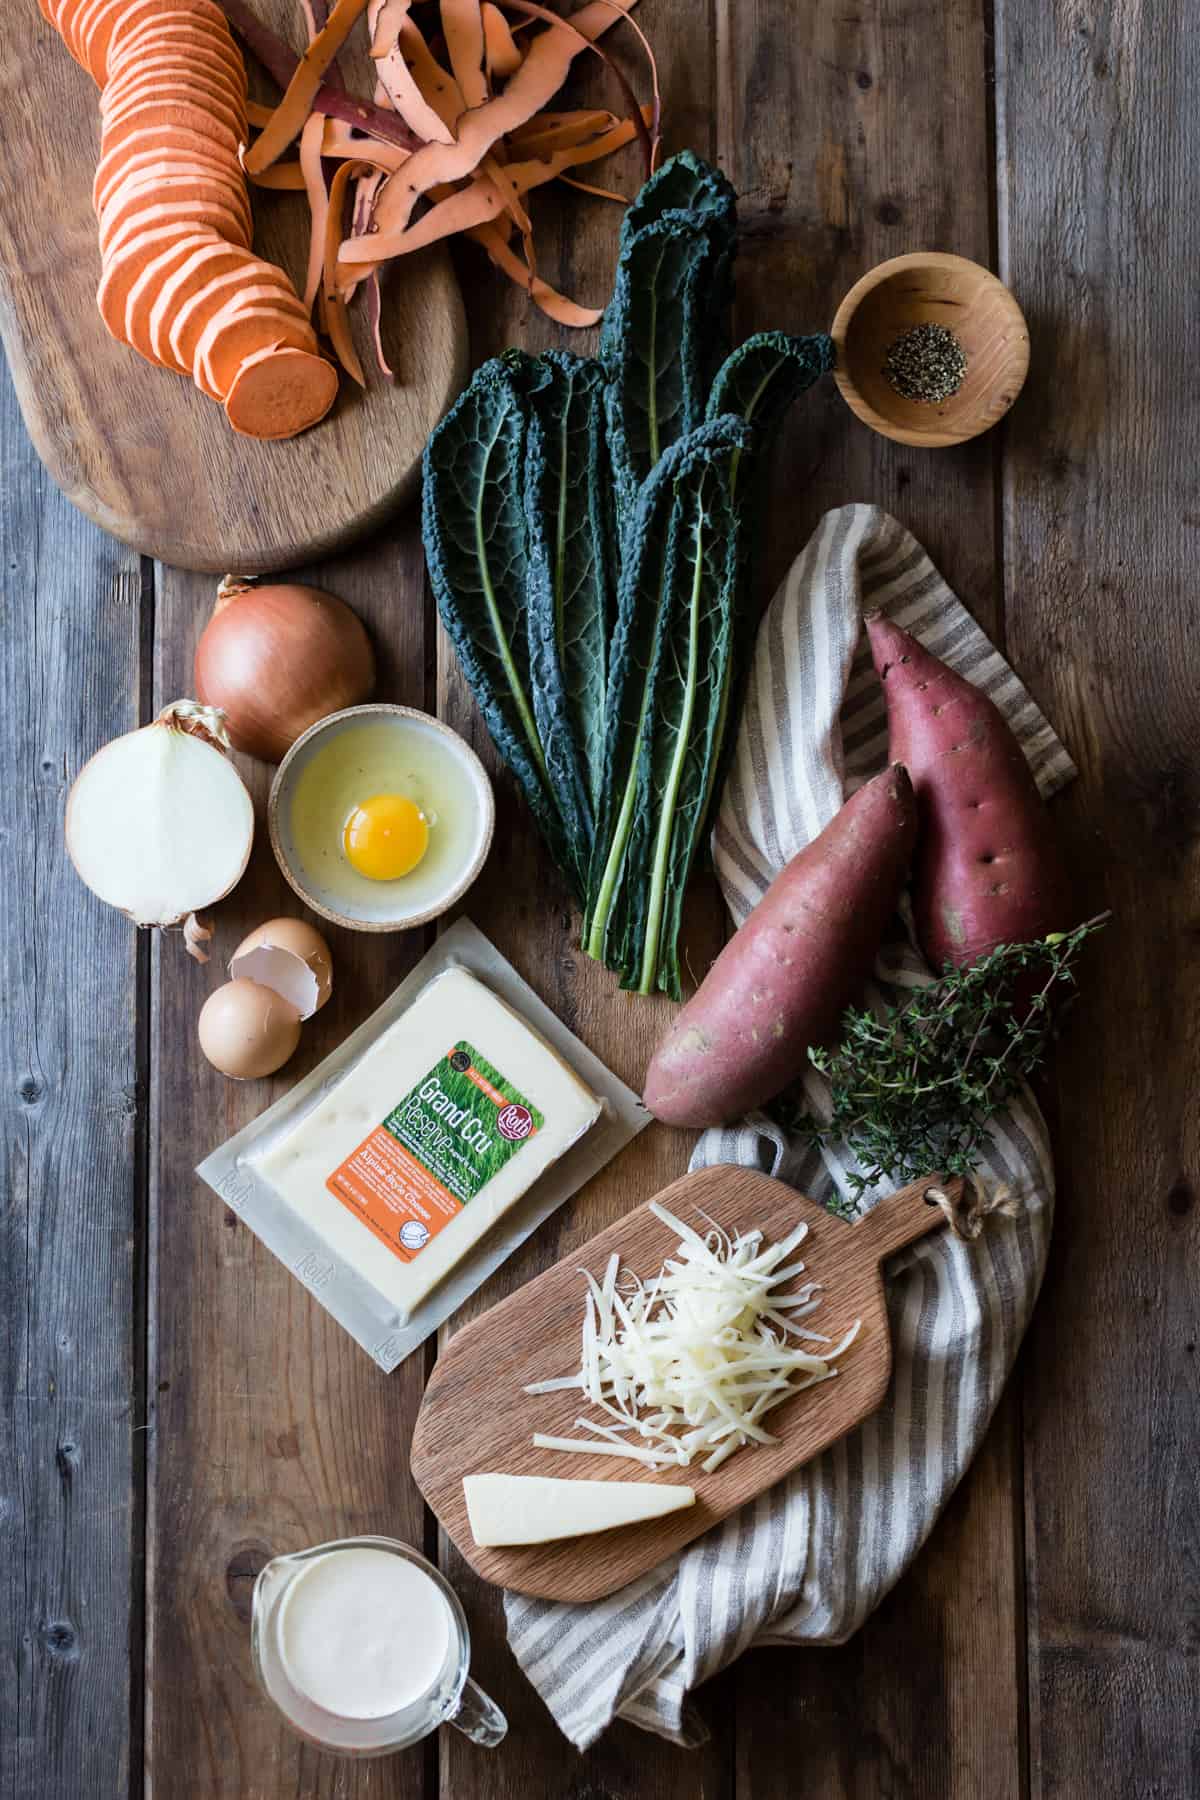 ingredients have been arranged prettily on a rustic wood tabletop